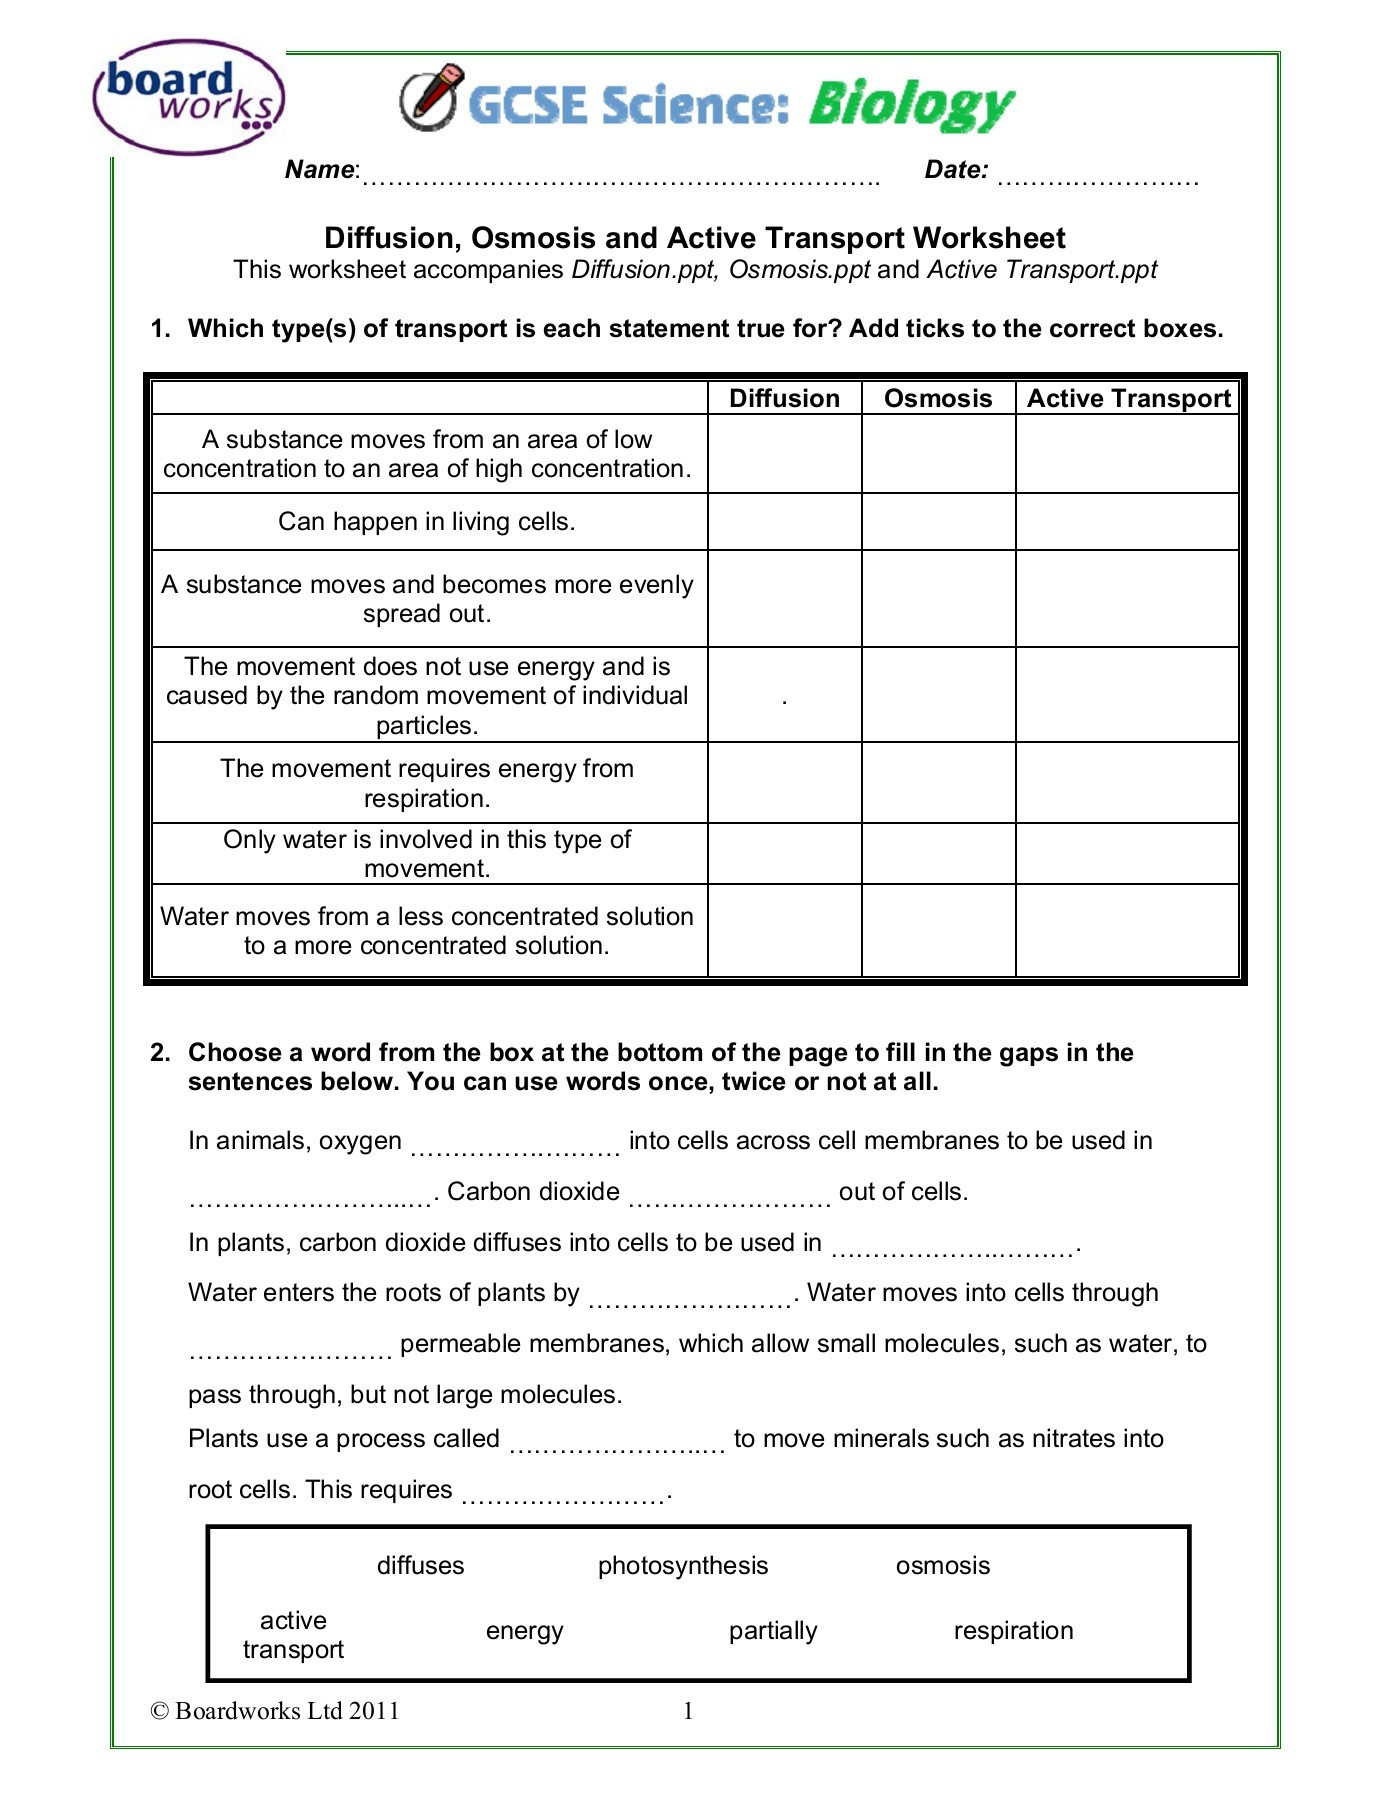 Cell Transport Worksheet Answers Diffusion Osmosis and Active Transport Worksheet Pages 1 4